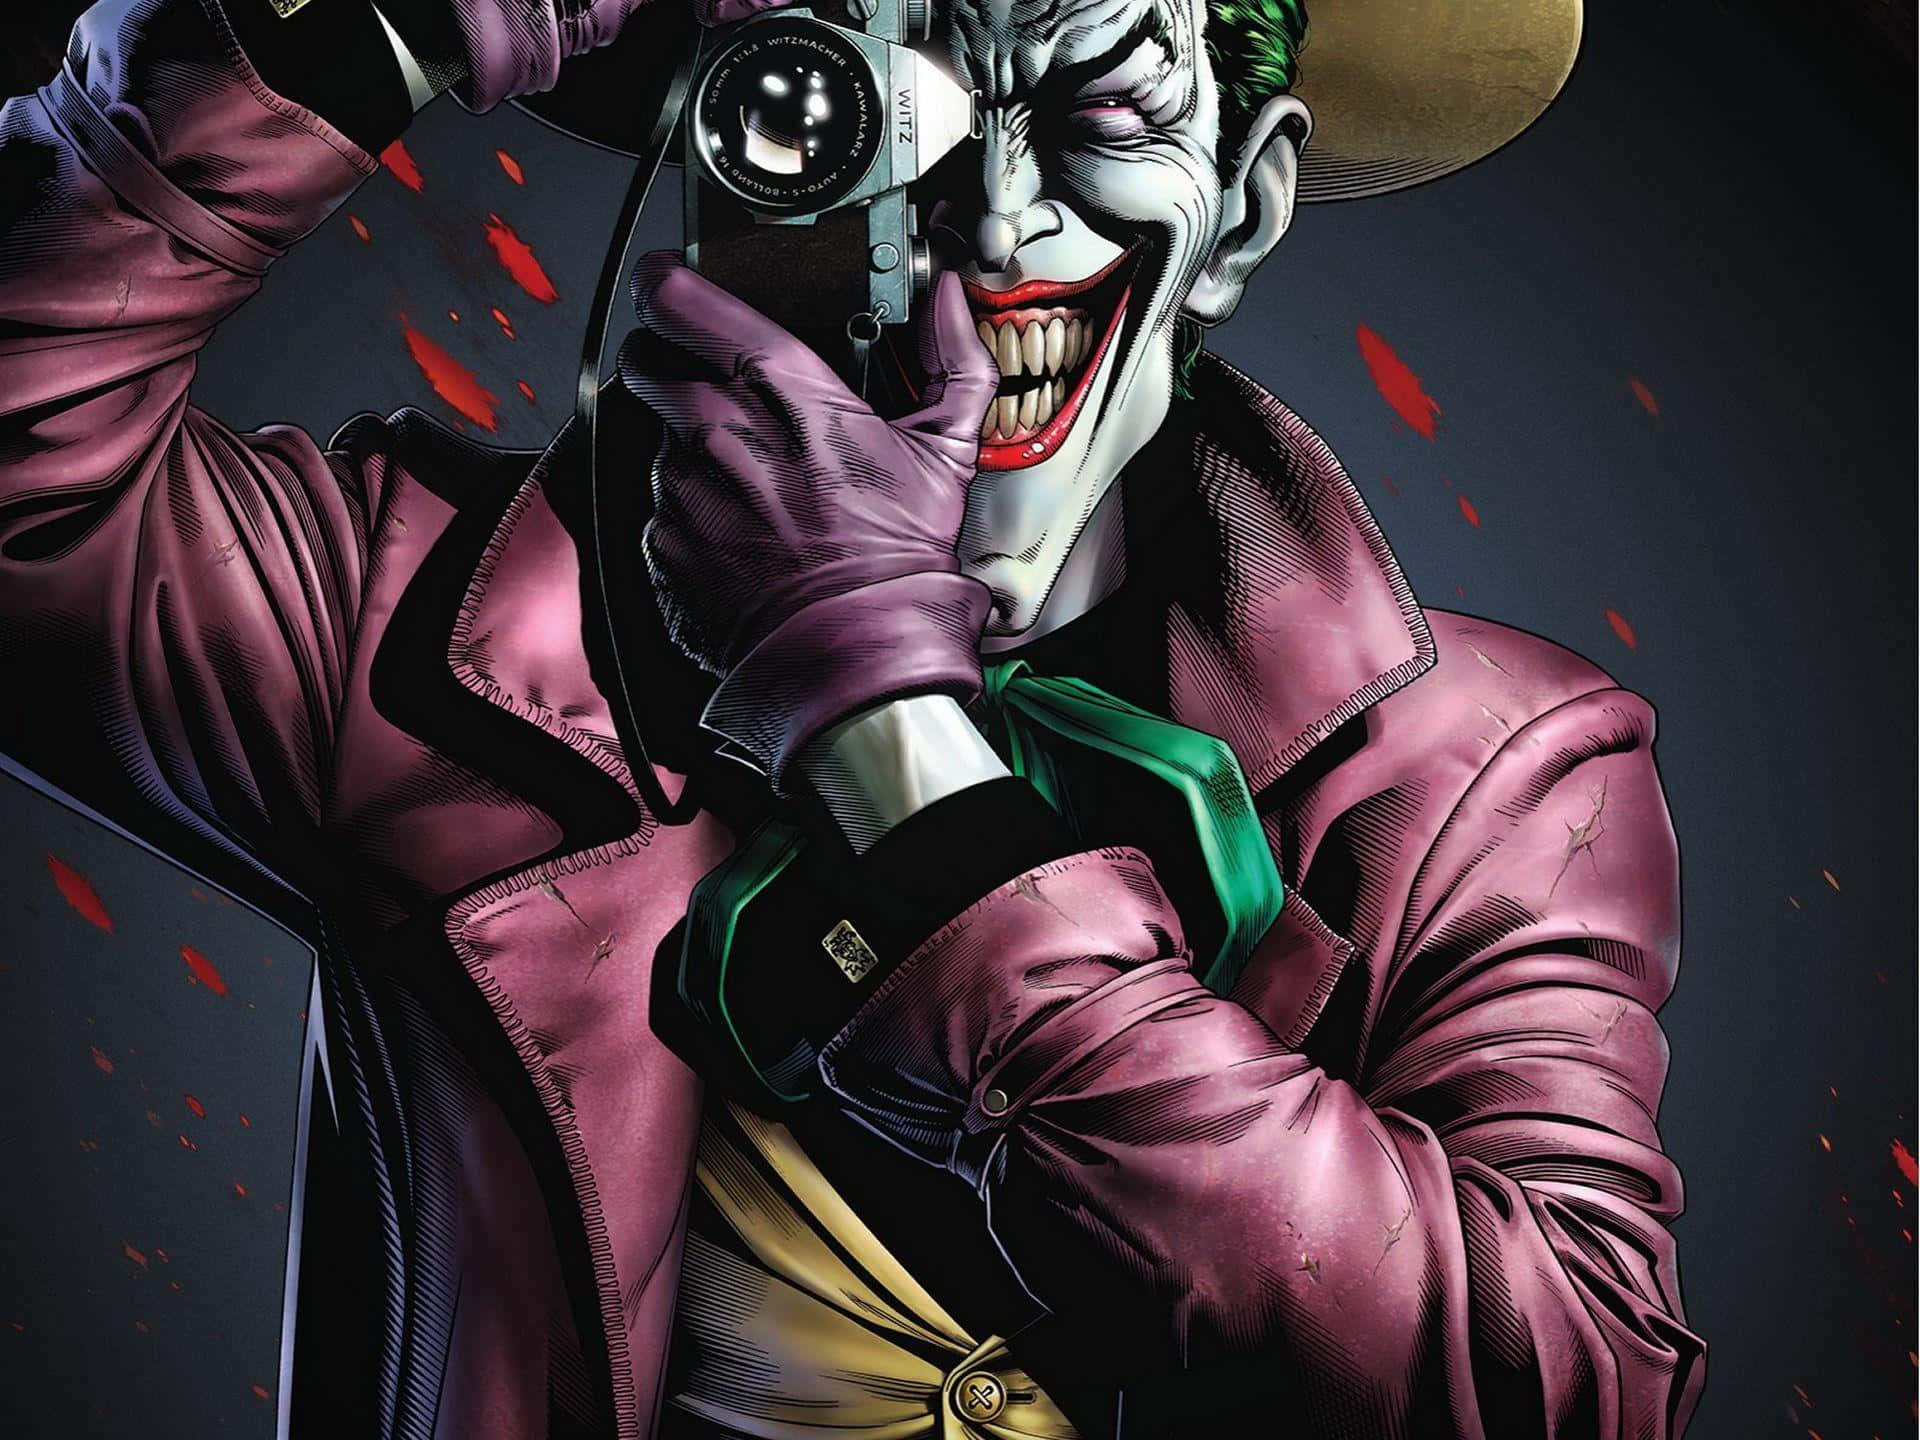 Joker's Iconic Maniacal Laugh Background